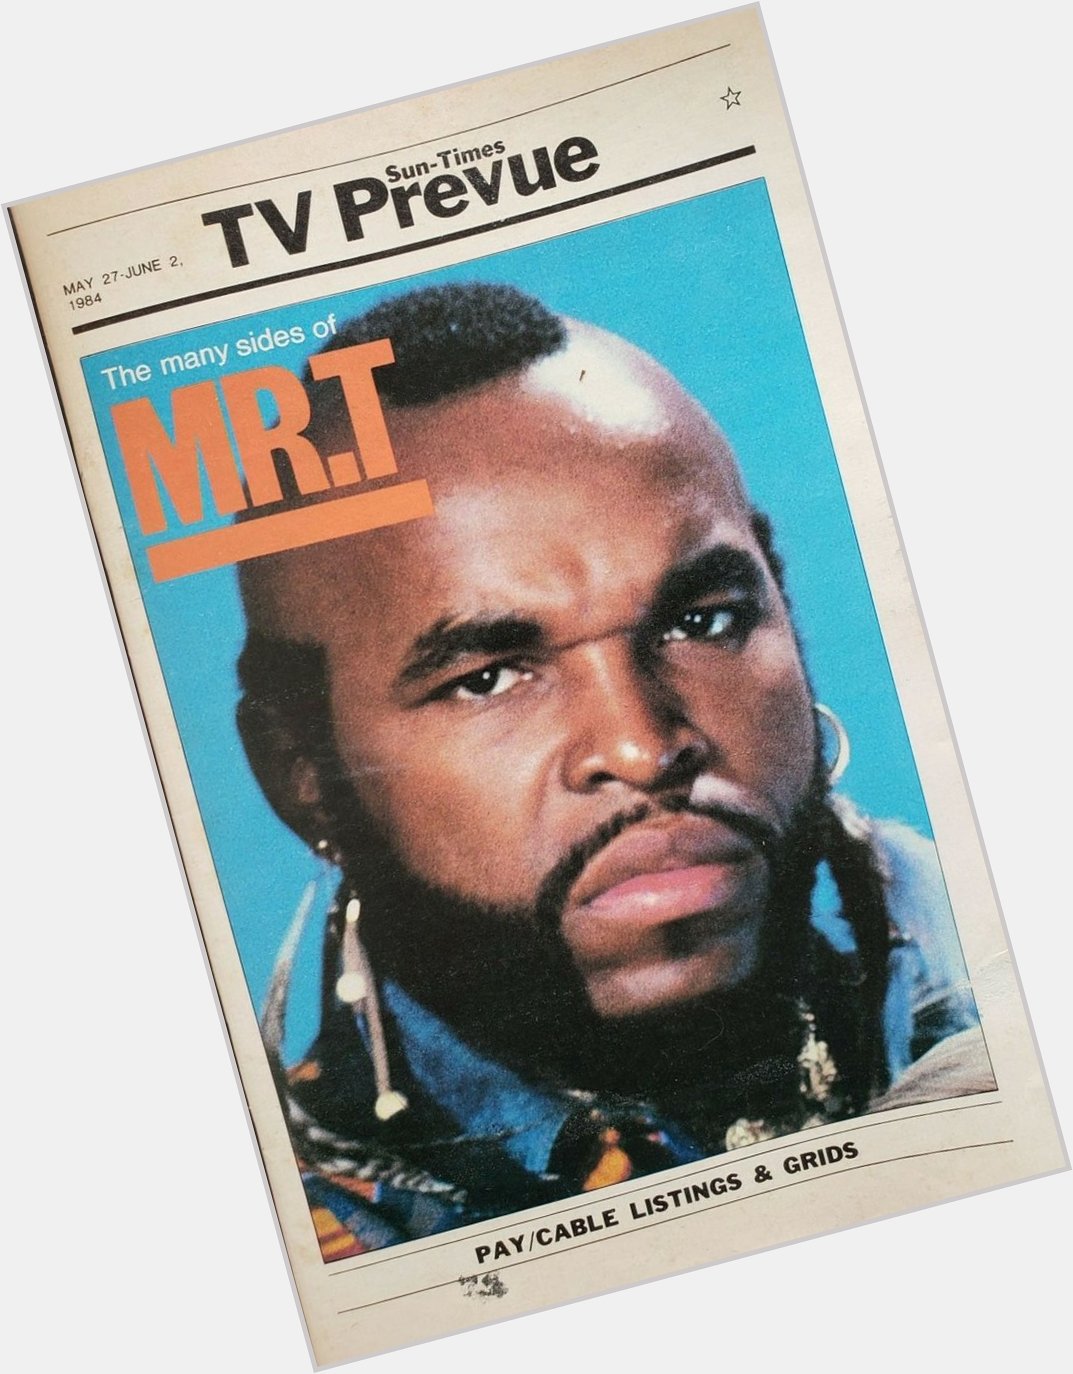 Happy Birthday to Chicago\s own Mr T.  
Born on this day in 1969
Chicago Sun-Times TV Prevue.  May 27 - June 2, 1984 